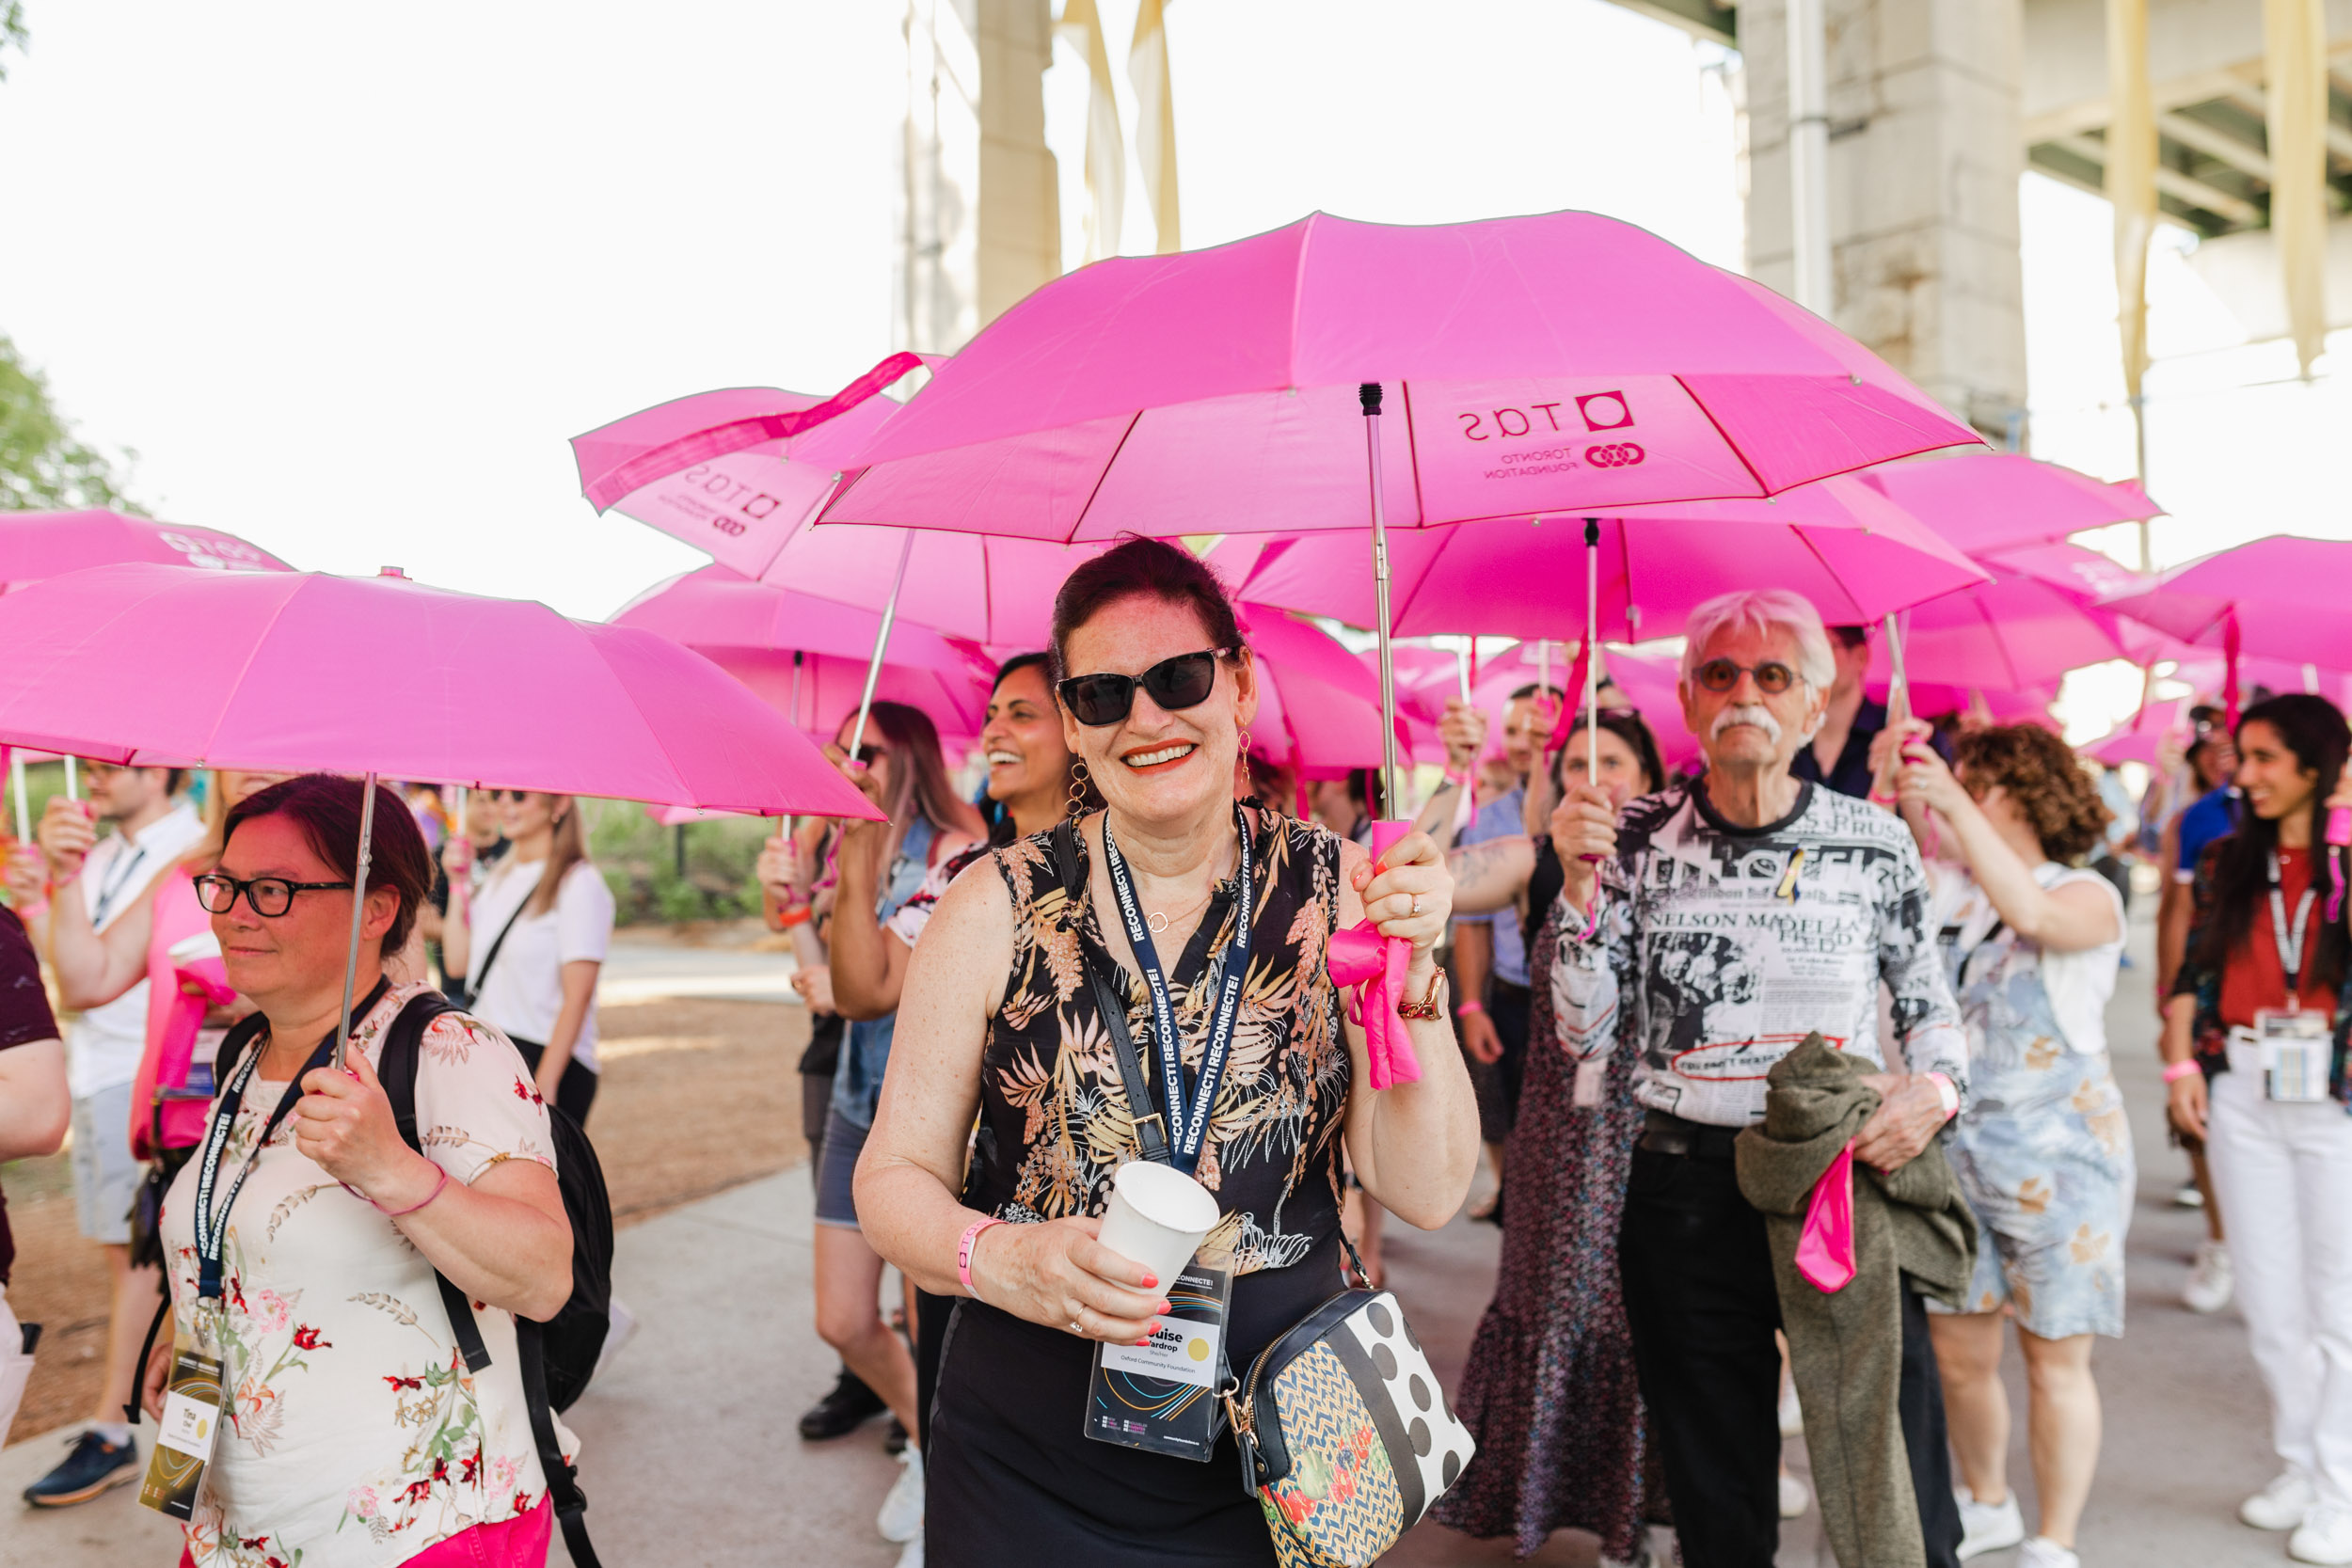 Conference attendees with pink umbrellas.